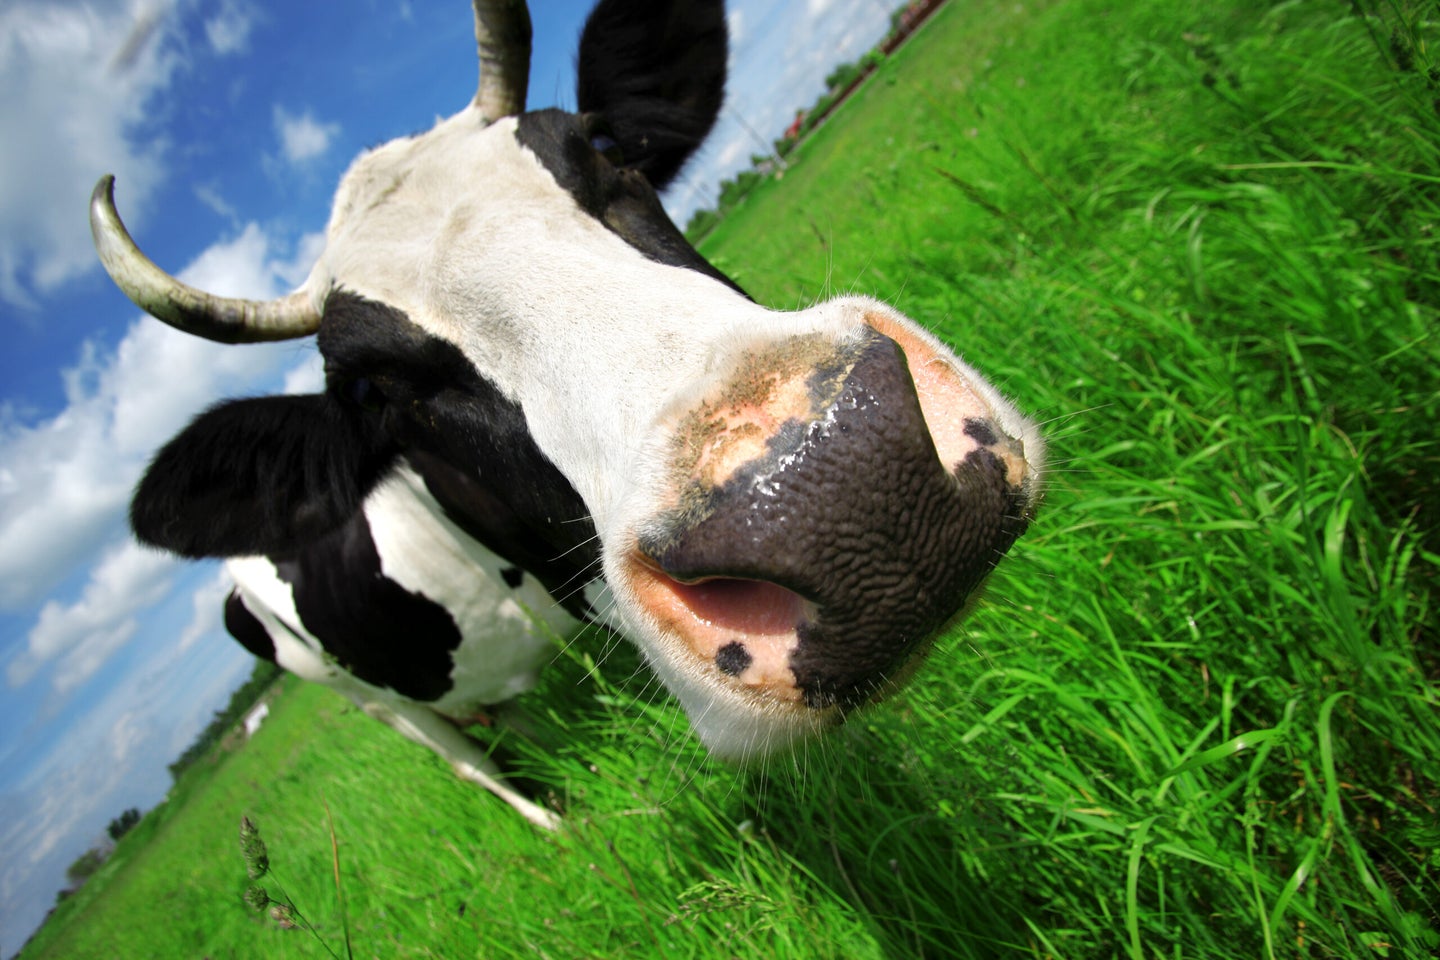 Cows that get a little hemp may act silly—but it could also help make their lives better.